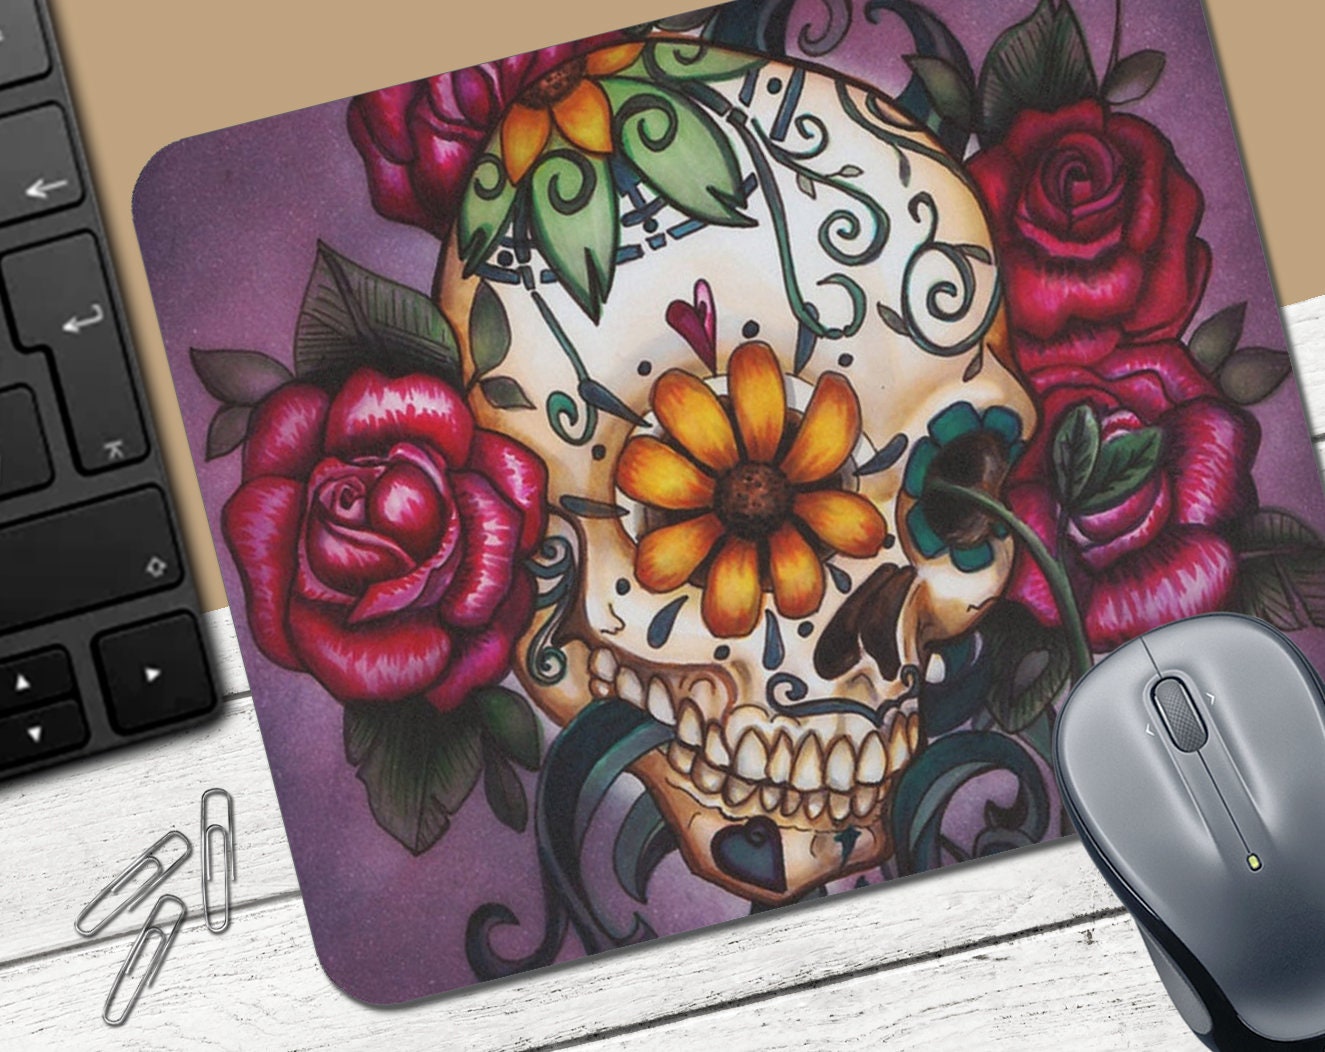  Skull Dead with Romantic Roses Celebration Day Gaming Mouse Pad  for Desk,Extended Stitched Edges Mousepad,Computer Keyboard Desk Mat,Non  Slip Rubber Base Mouse Pads Desk Pad Desk Pads : Office Products